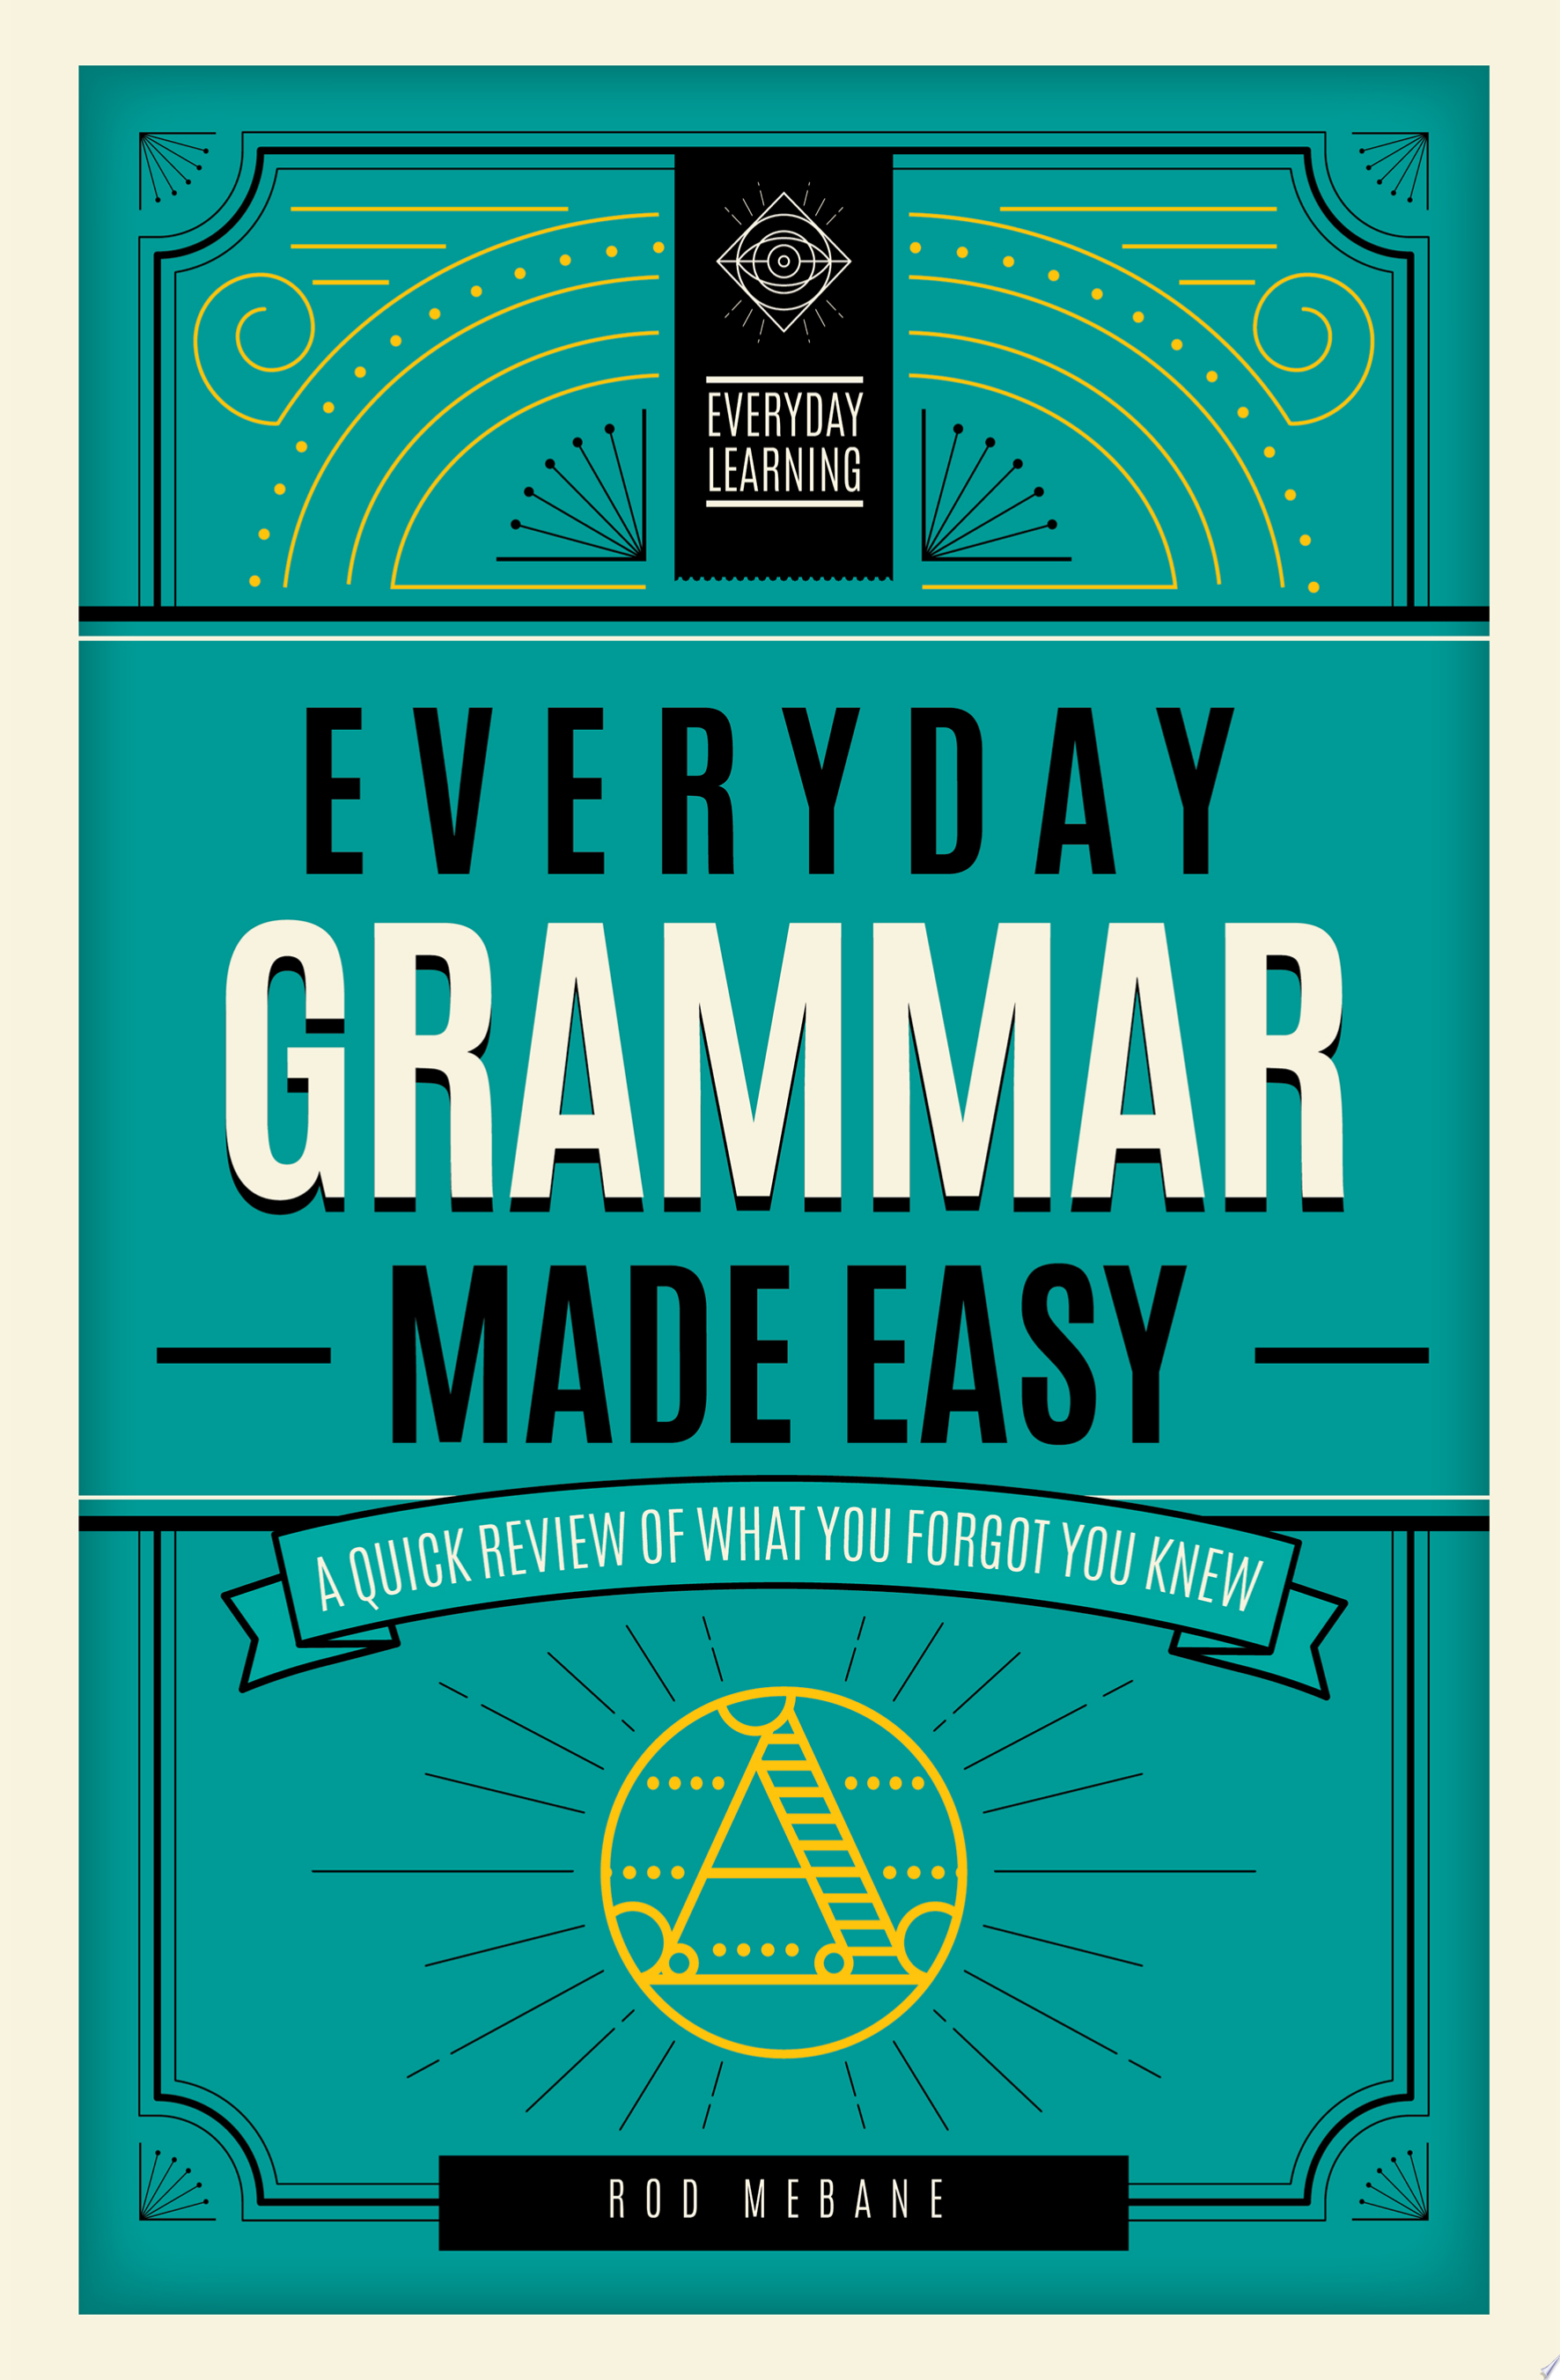 Image for "Everyday Grammar Made Easy"